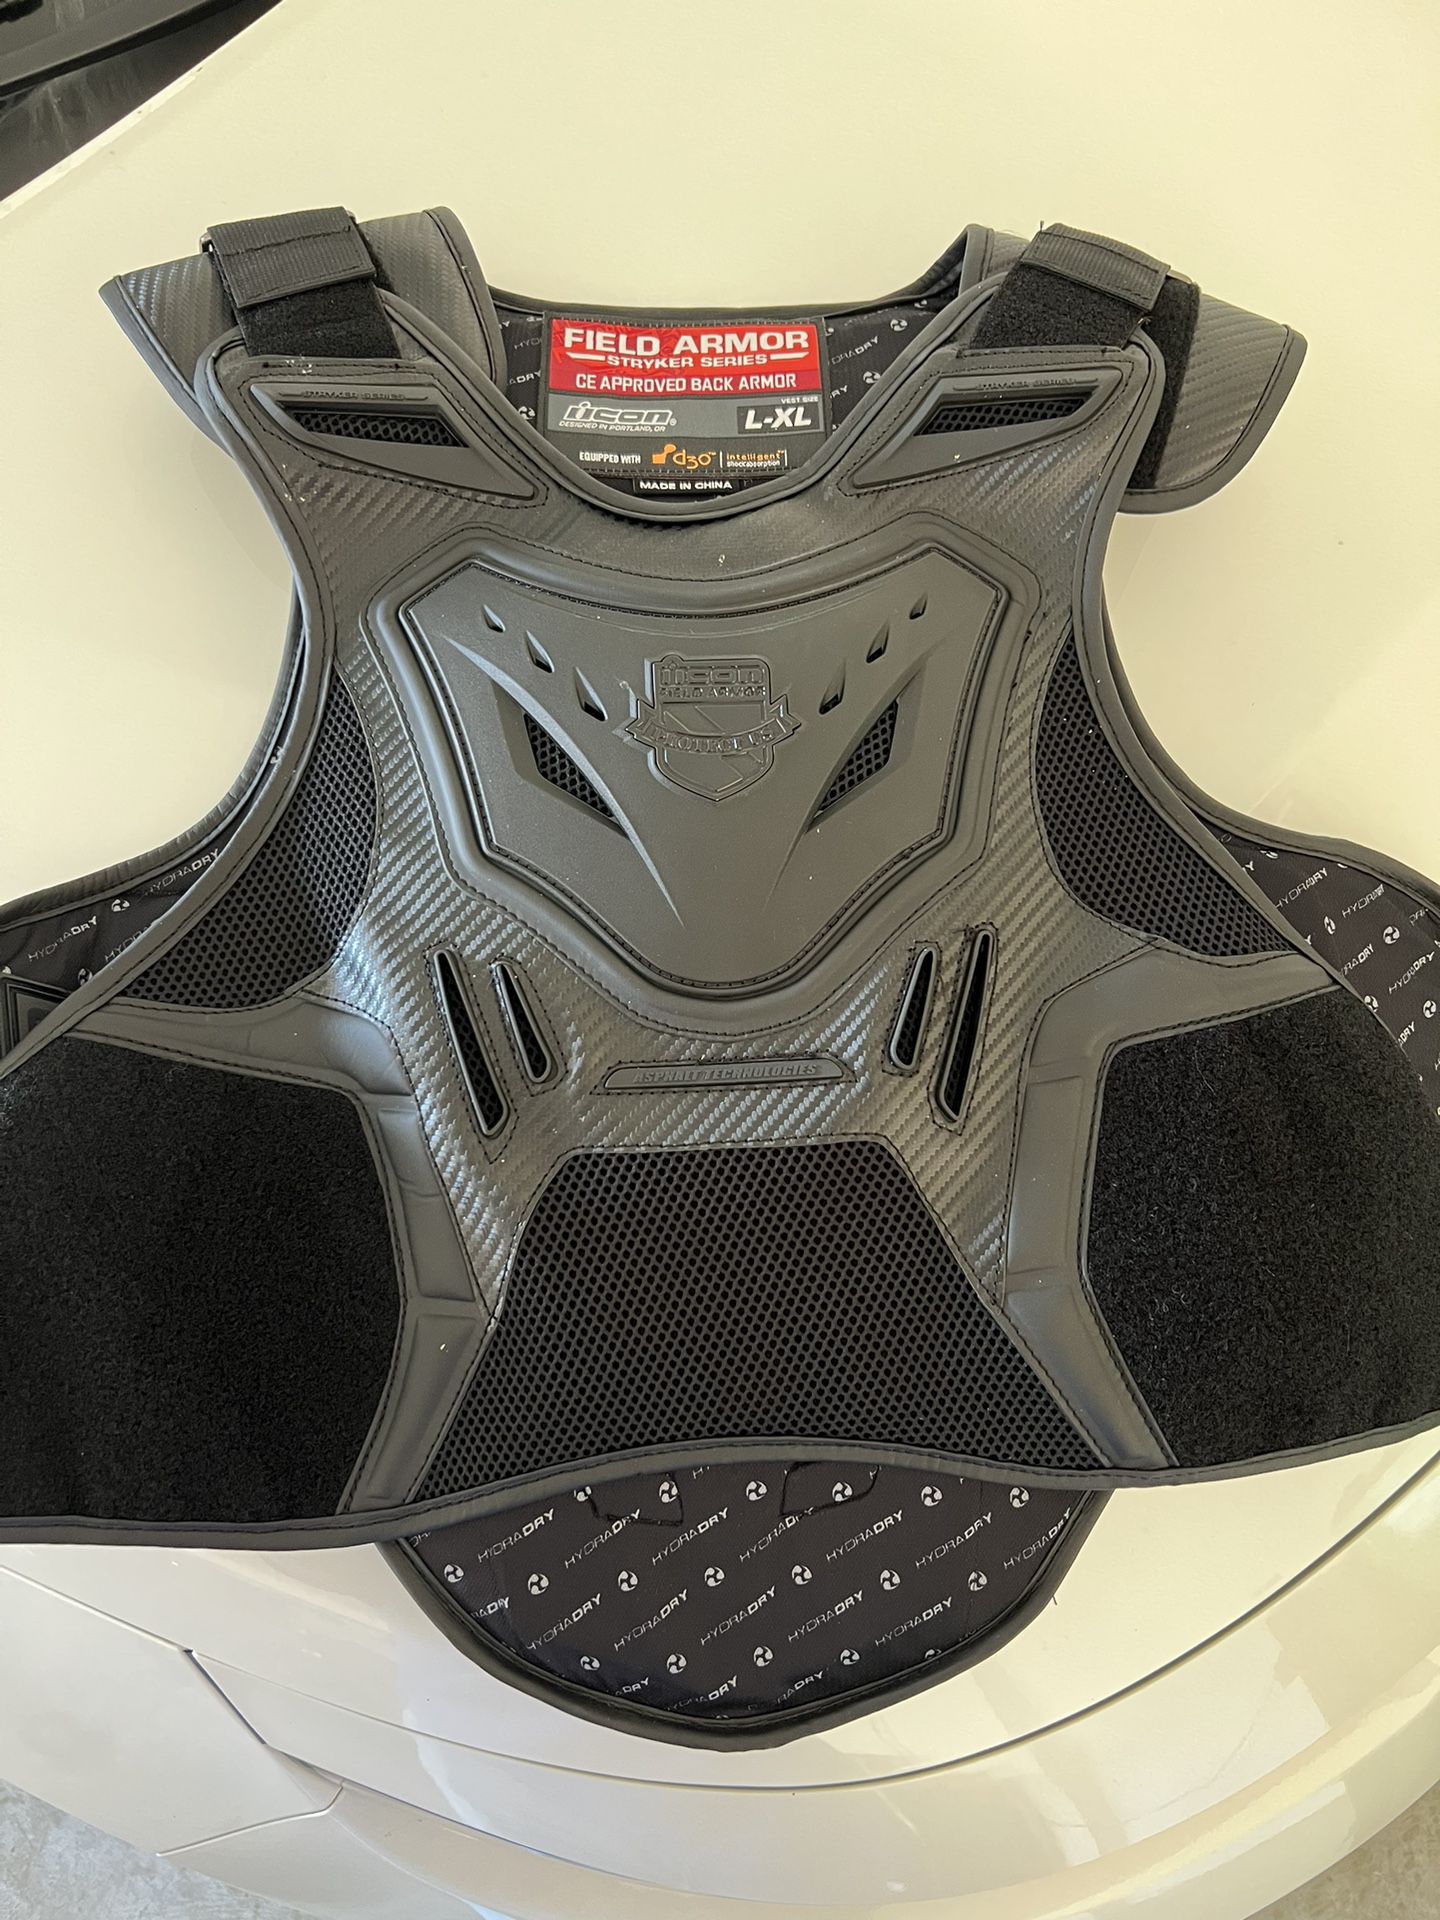 L/XL Motorcycle Spine Protector